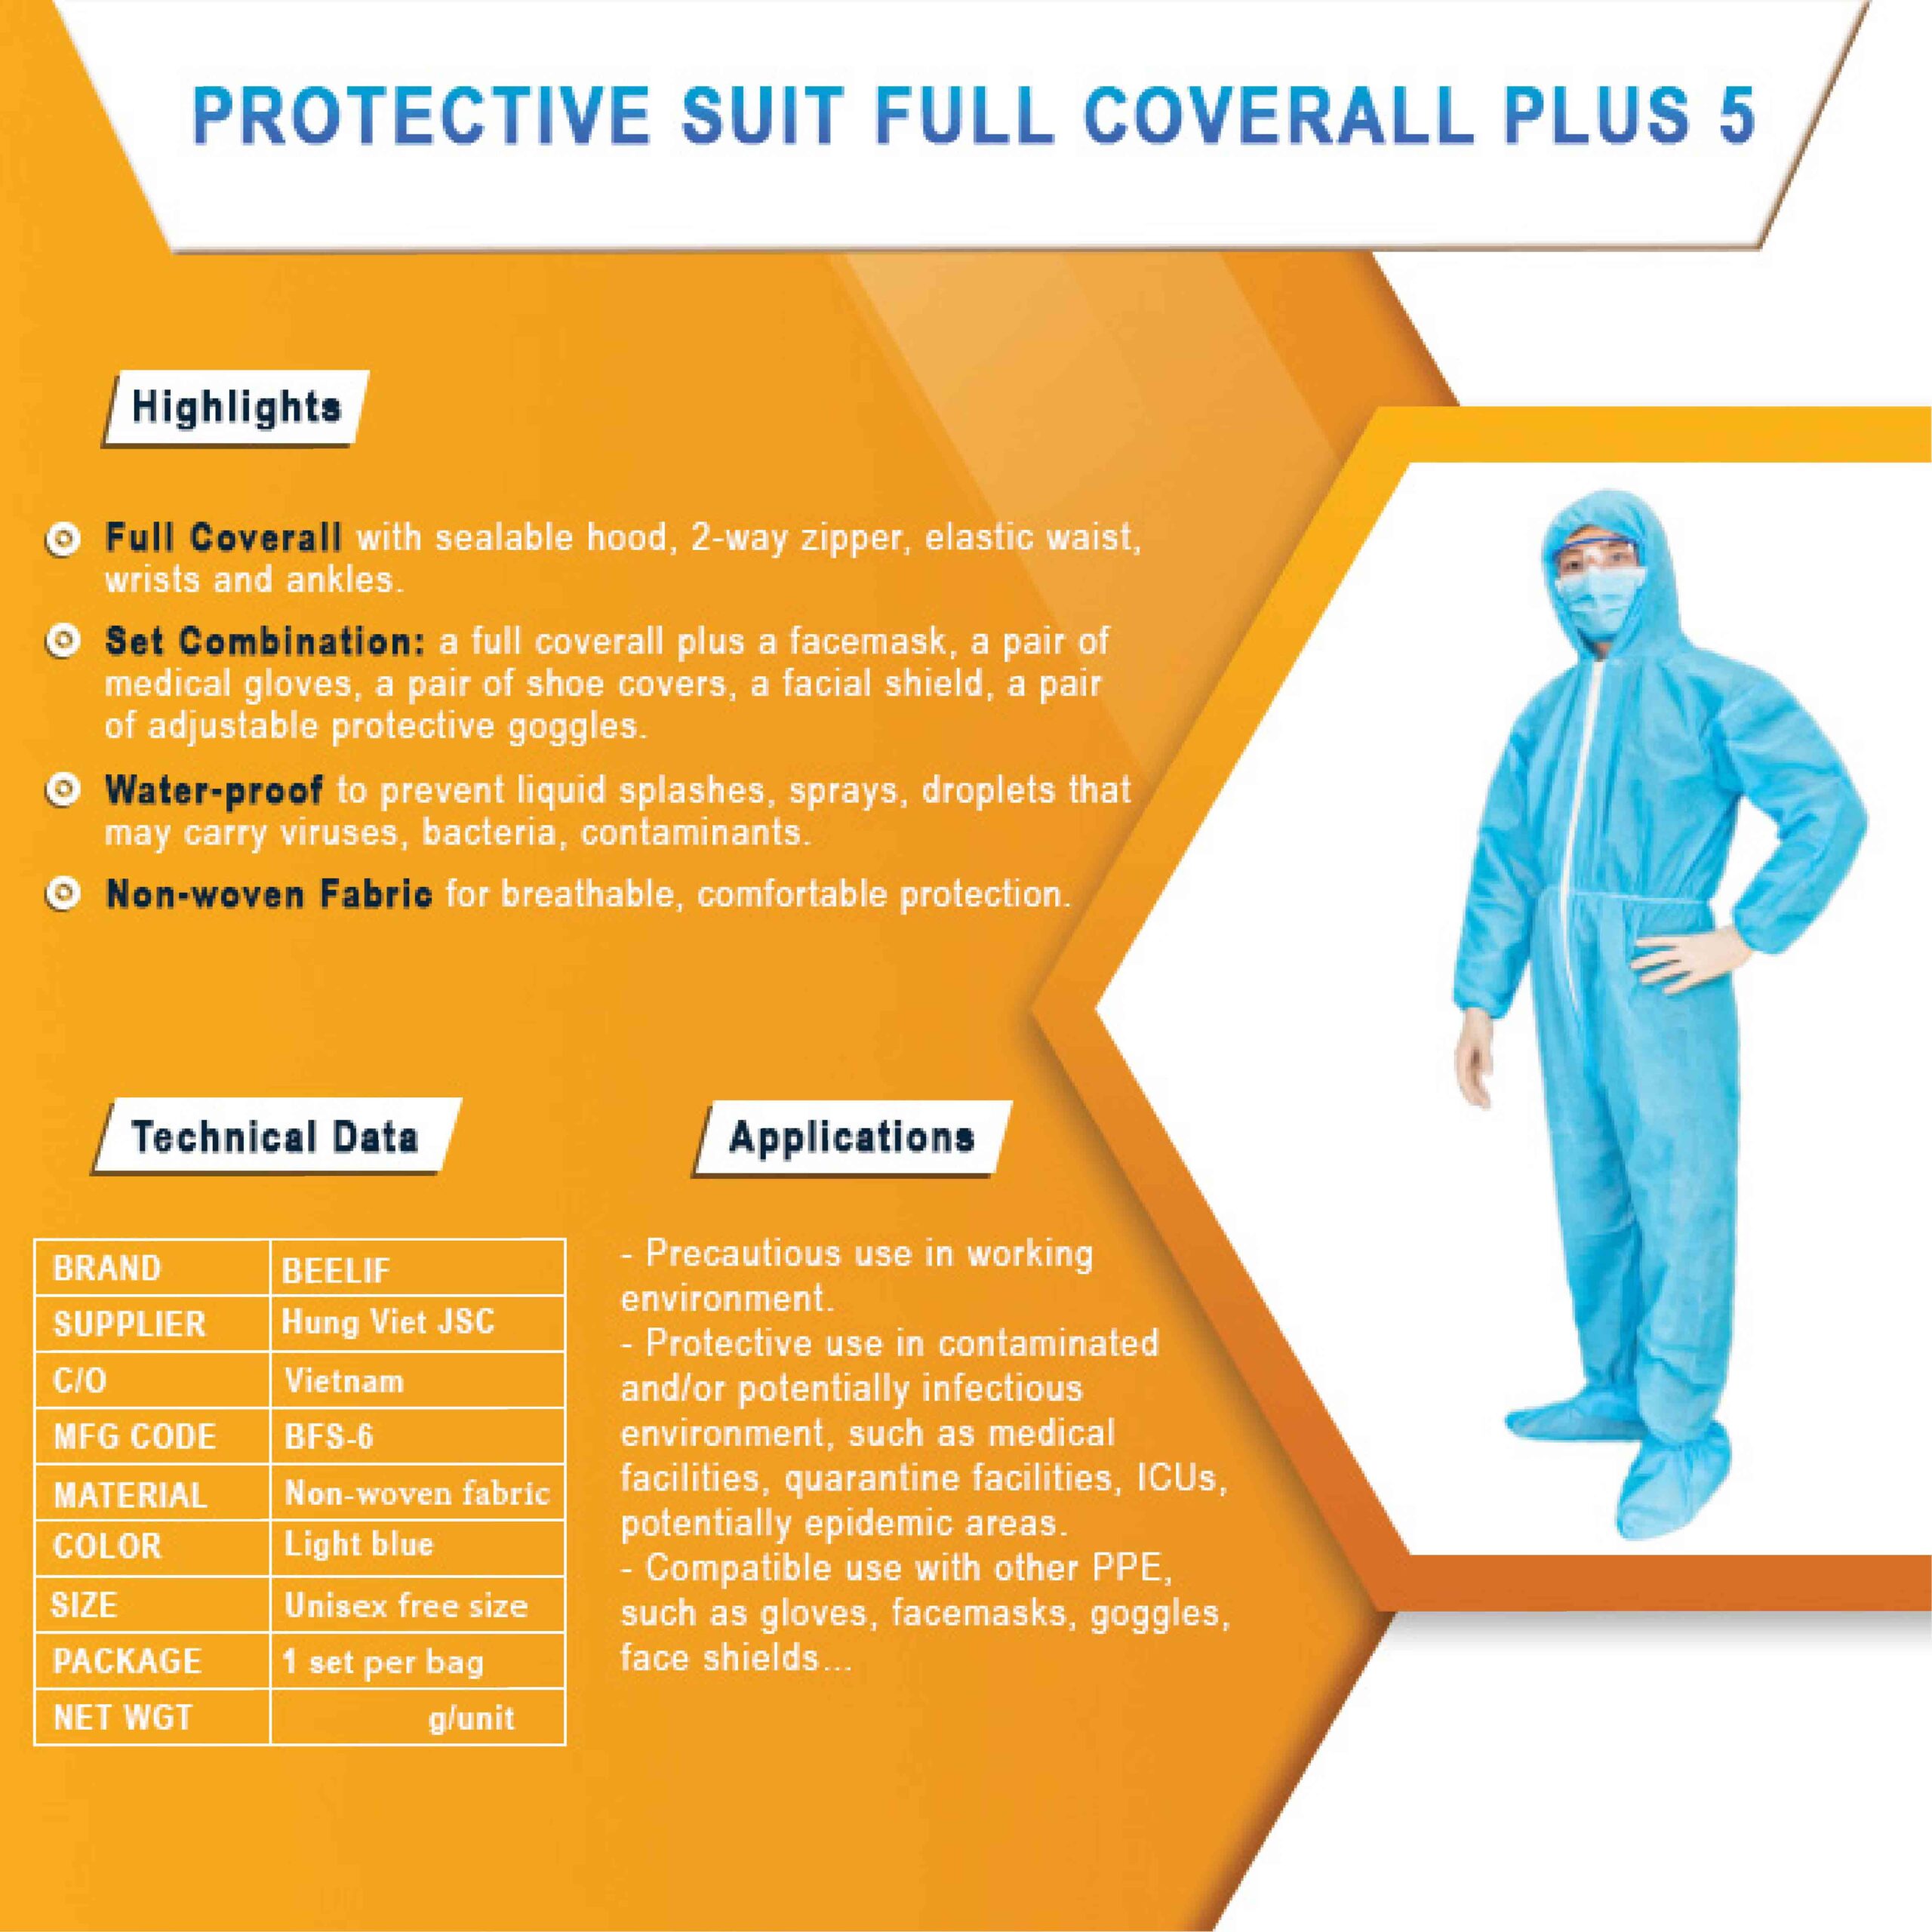 Protective suit full coverall & shoe covers